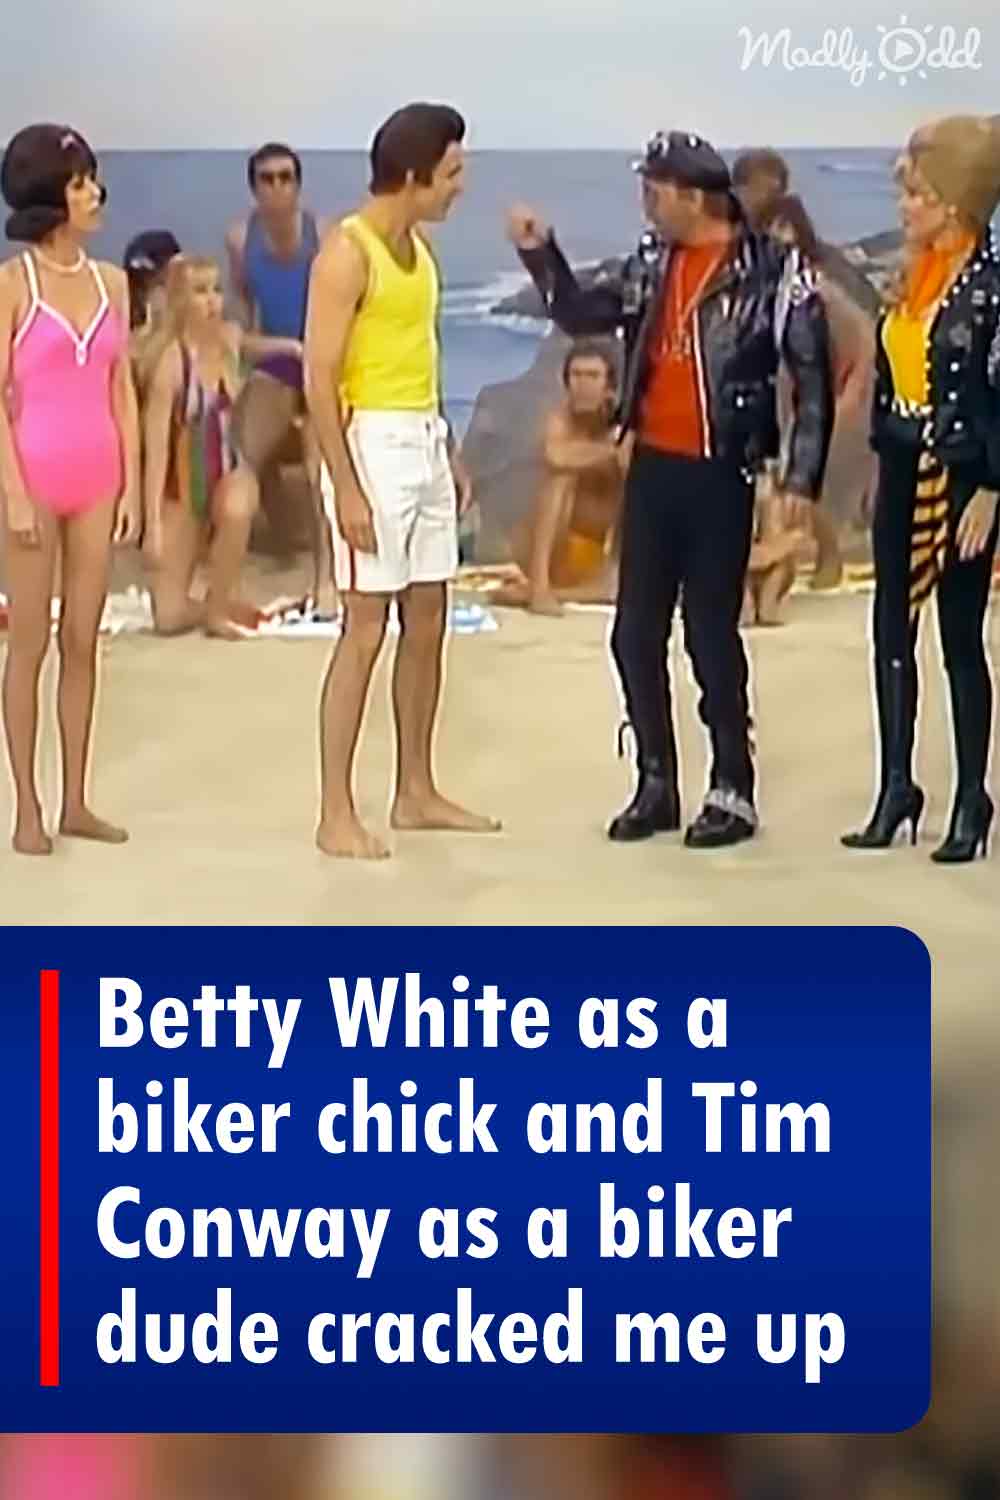 Betty White as a biker chick and Tim Conway as a biker dude cracked me up